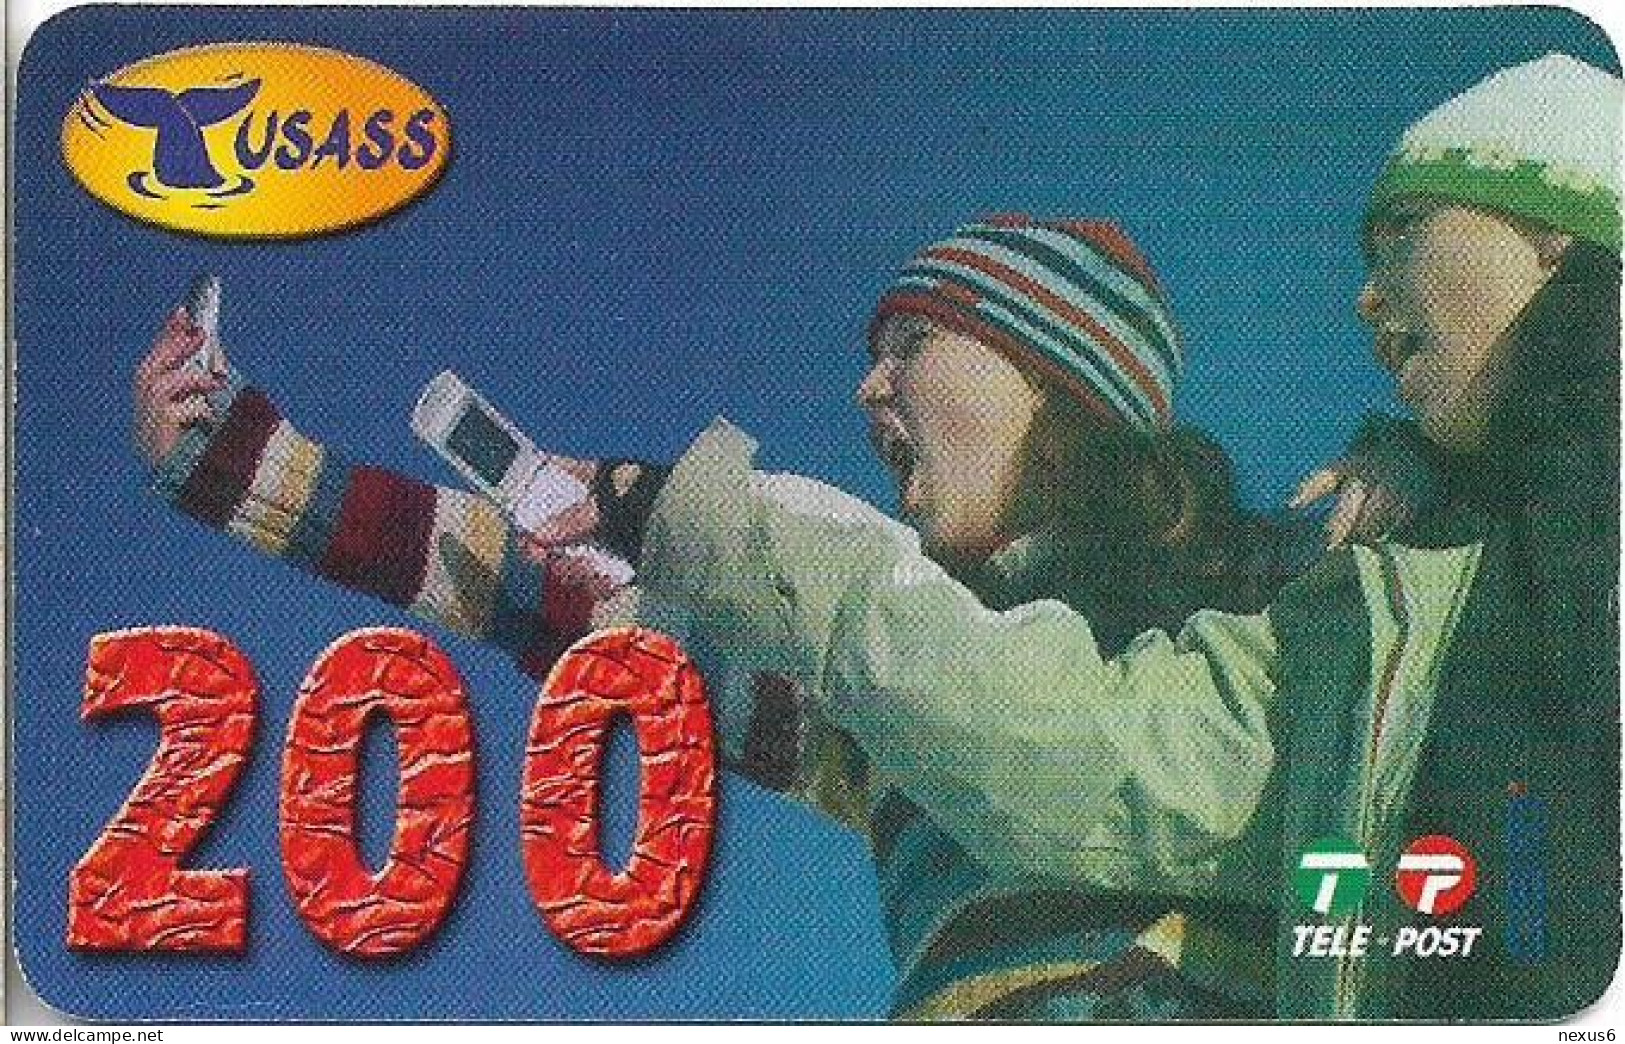 Greenland - Tusass - Two Girls With Mobile, GSM Refill, 200kr. Exp. 04.02.2007, Used - Groenlandia